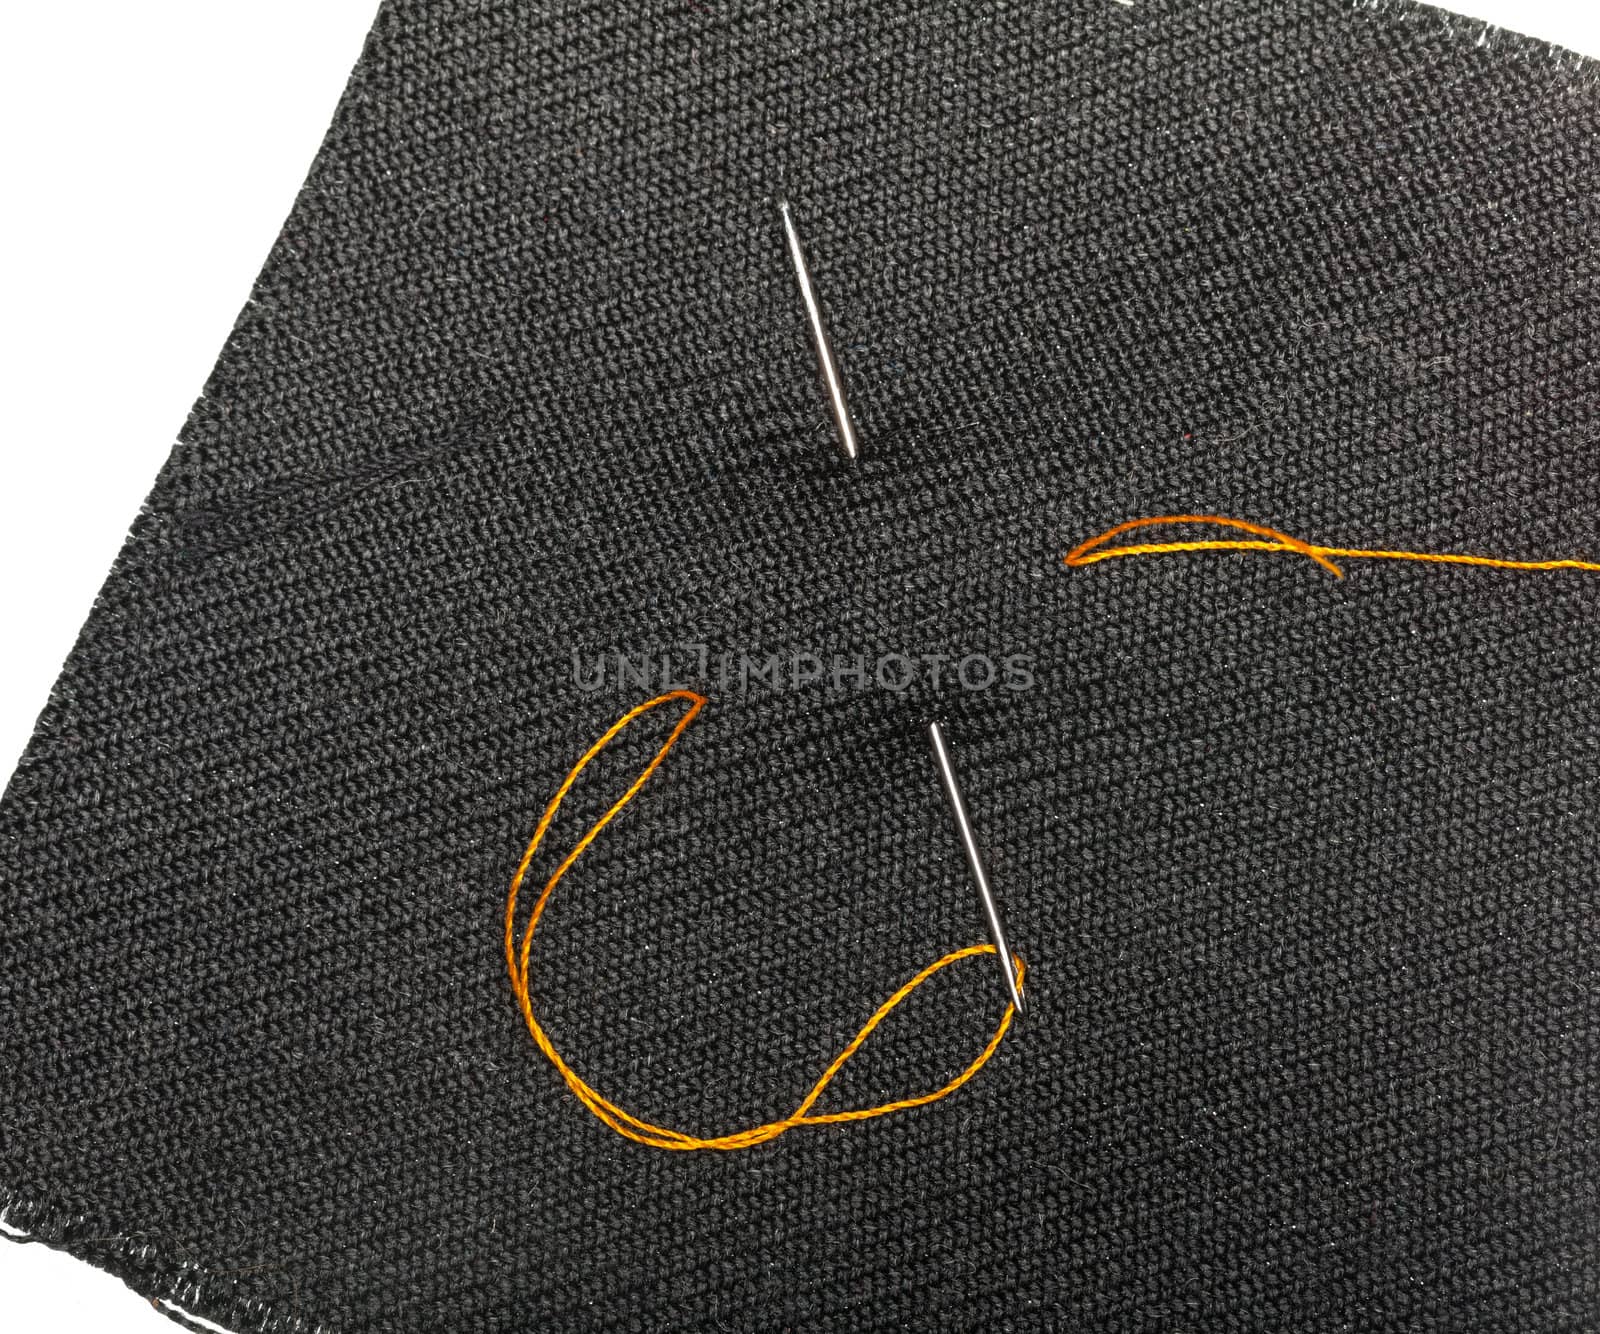 Orange cotton thread and needle pushed through piece of woven black cloth